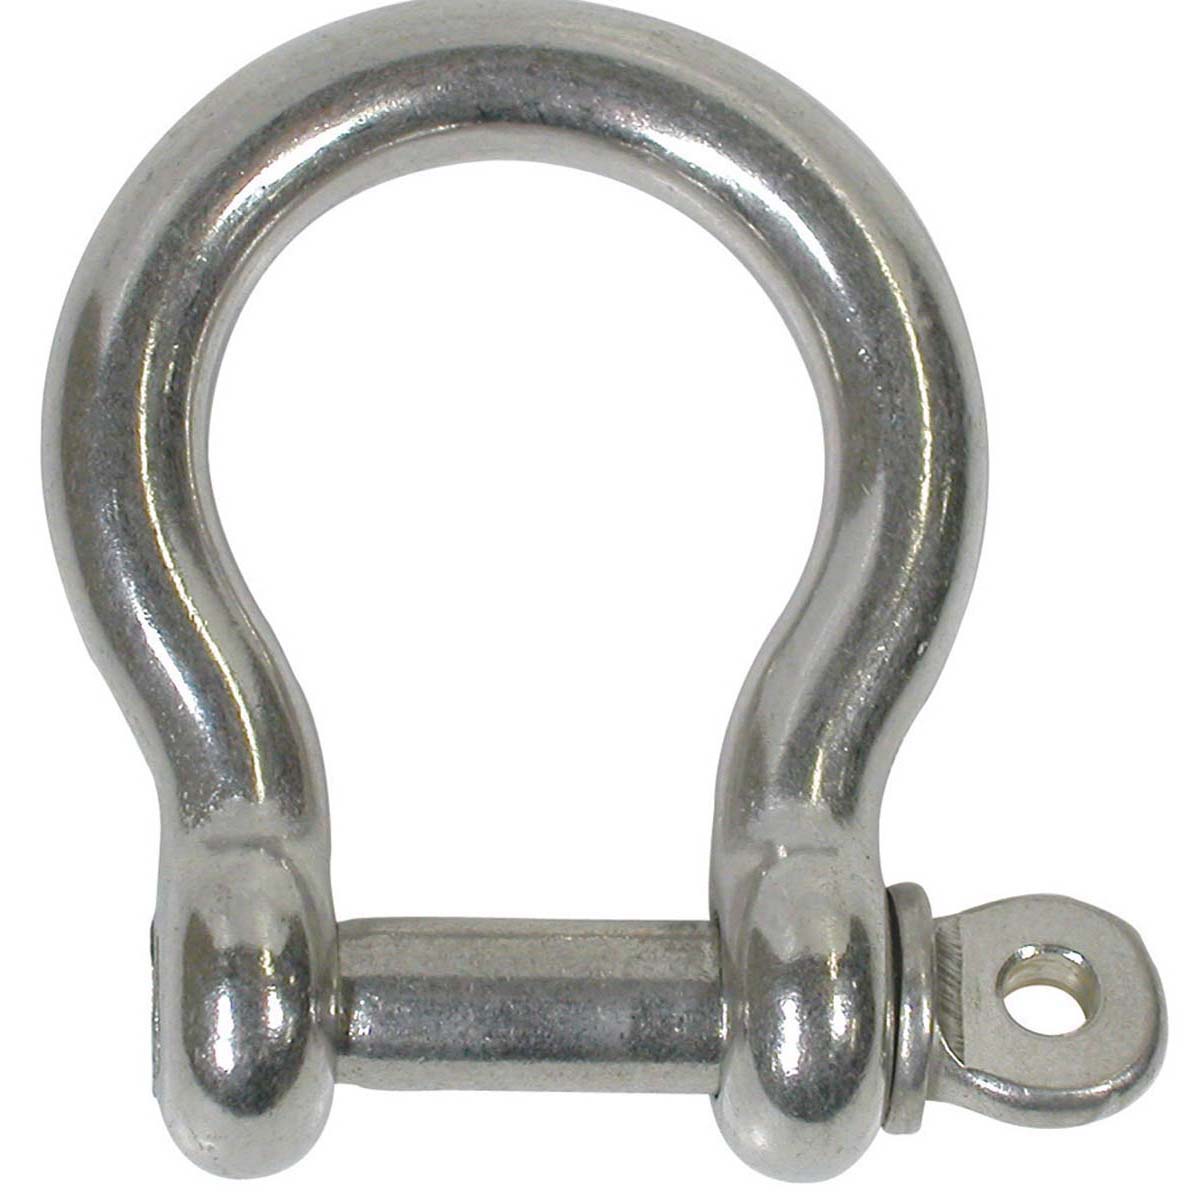 Blueline Stainless Steel Bow Shackle 8mm